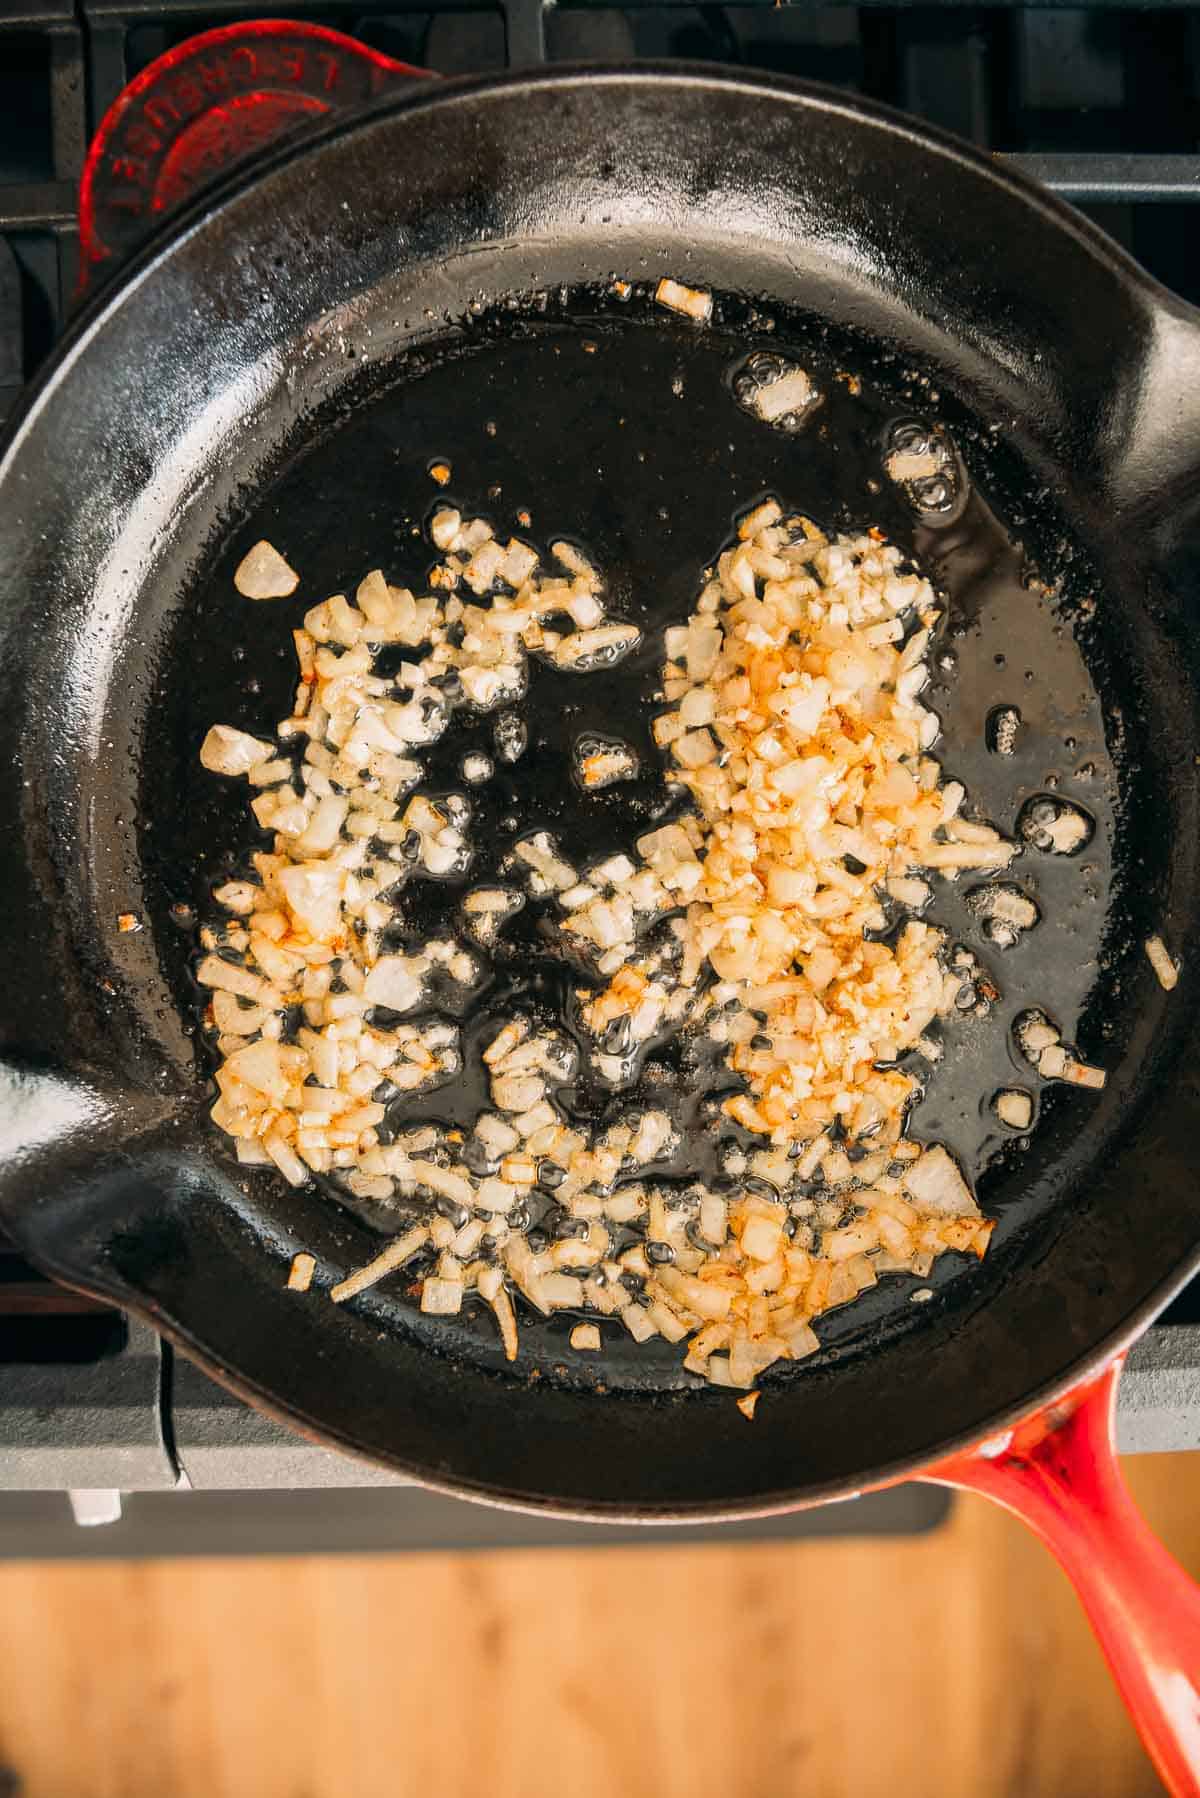 Fried onions in a skillet on a stove top.